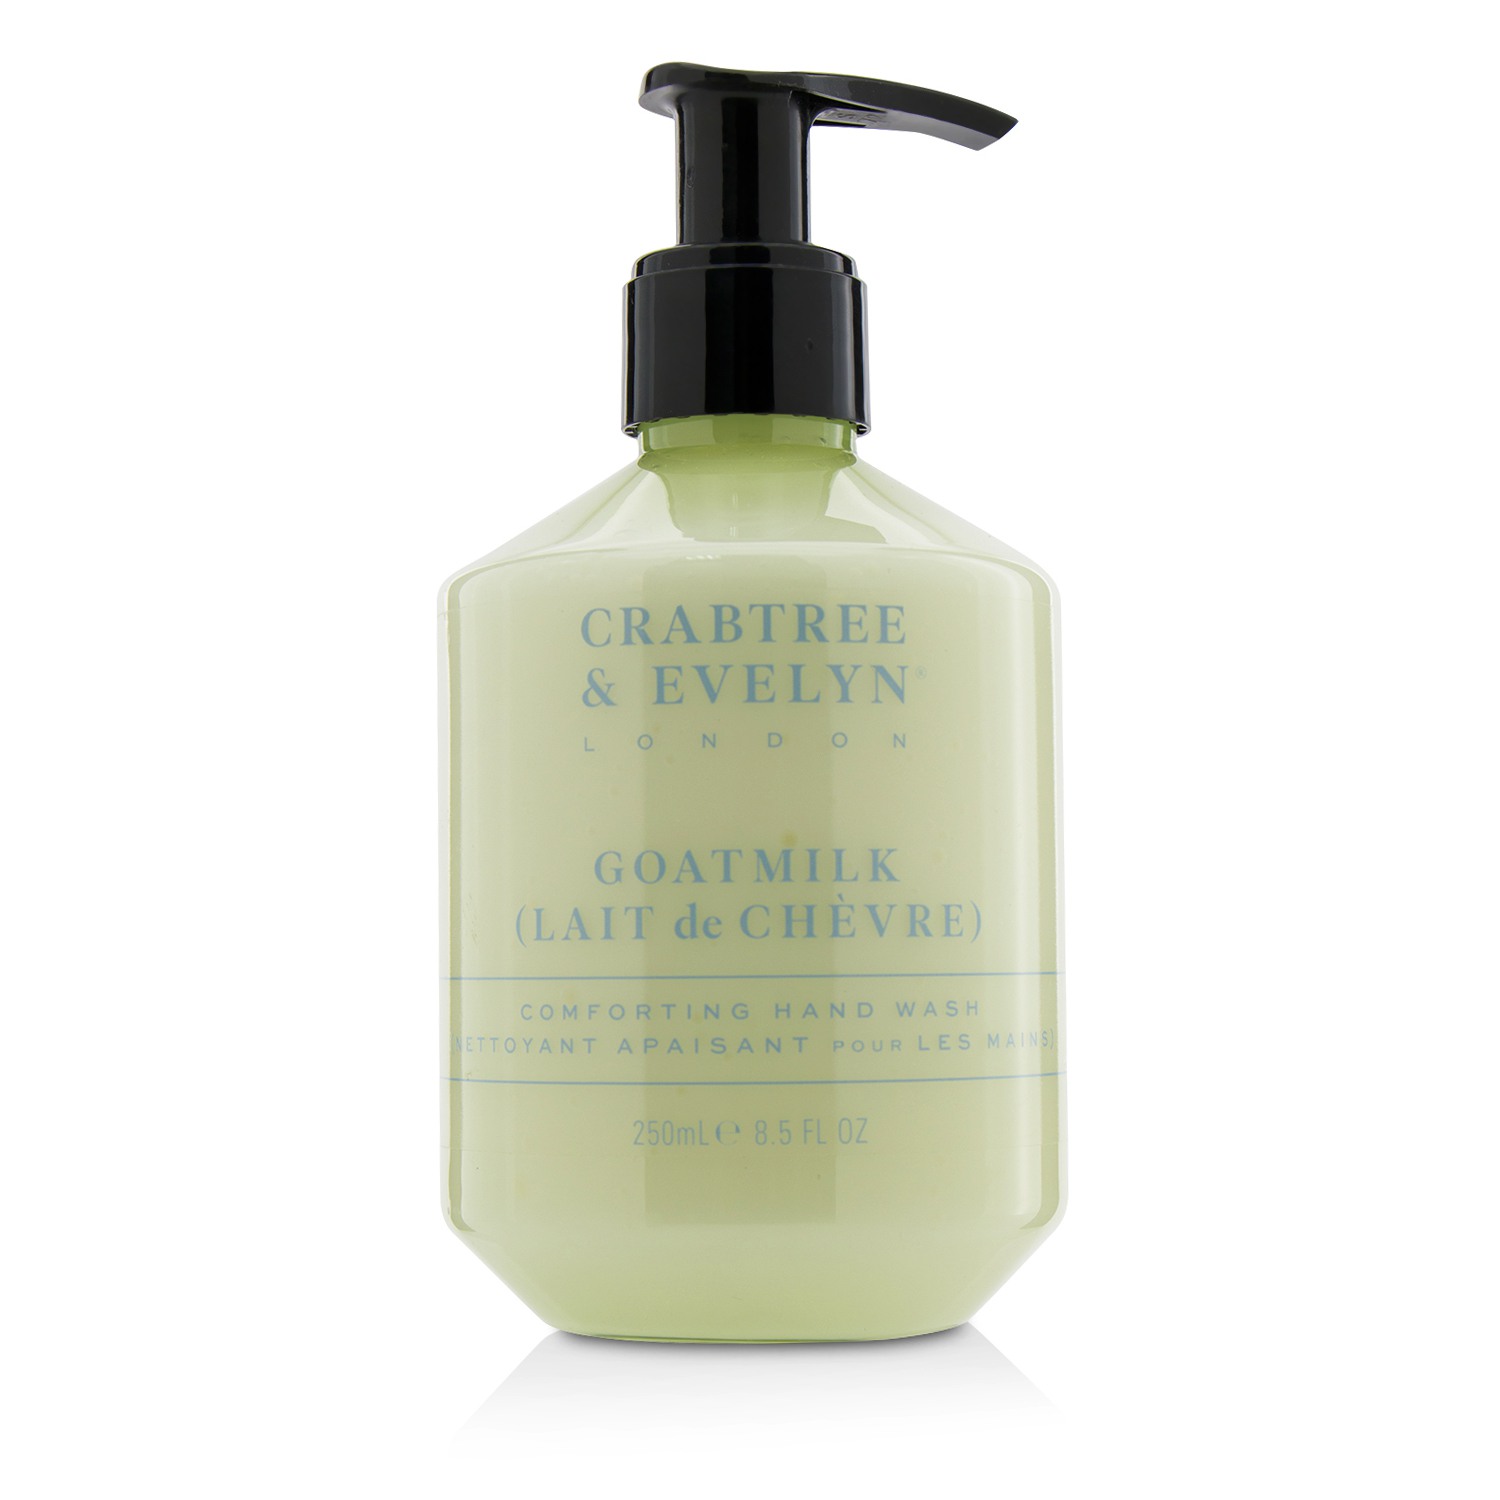 Goatmilk Comforting Hand Wash Crabtree & Evelyn Image